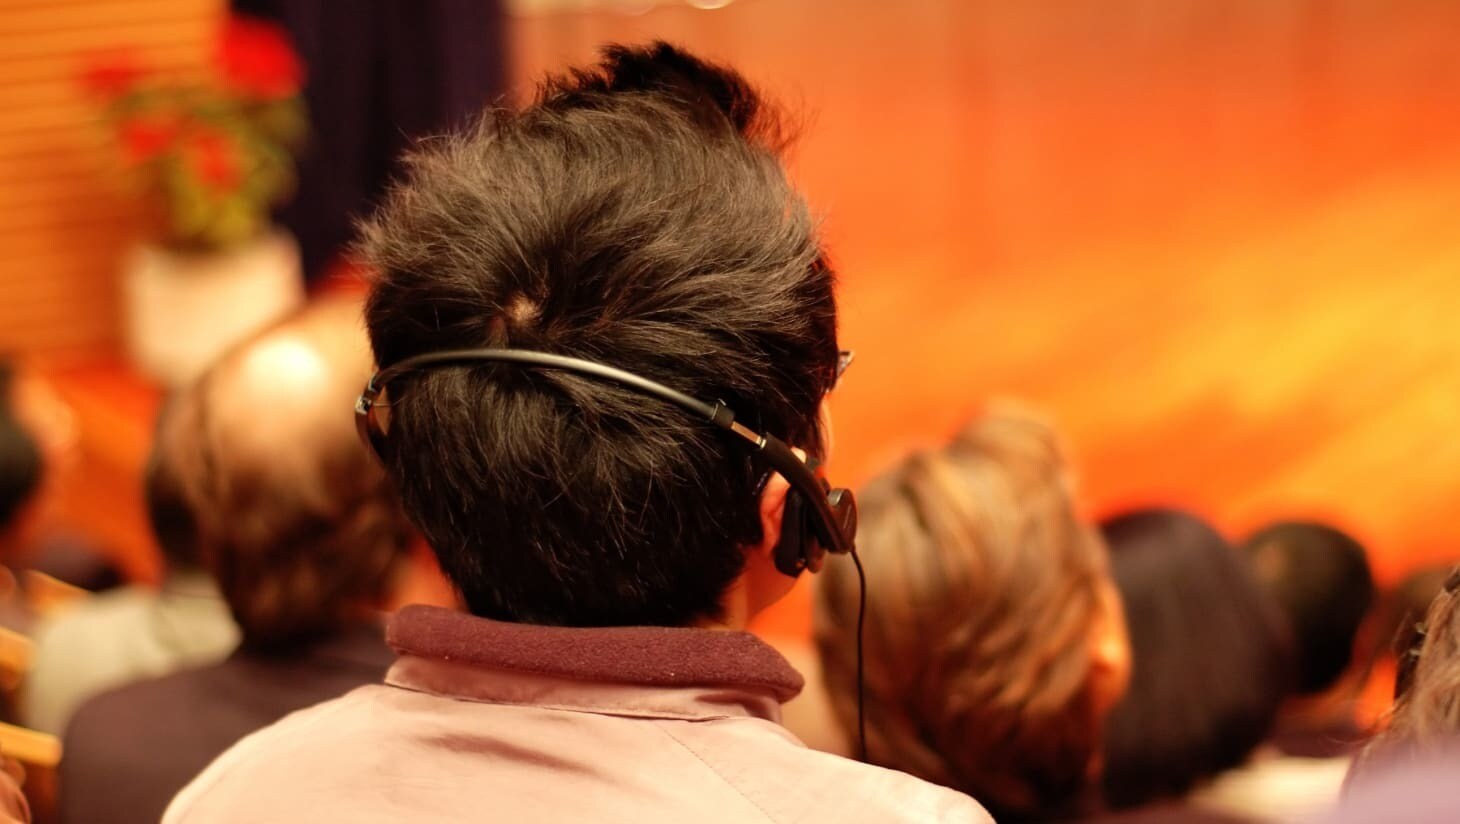 A member of the audience watching the performance with headphones.